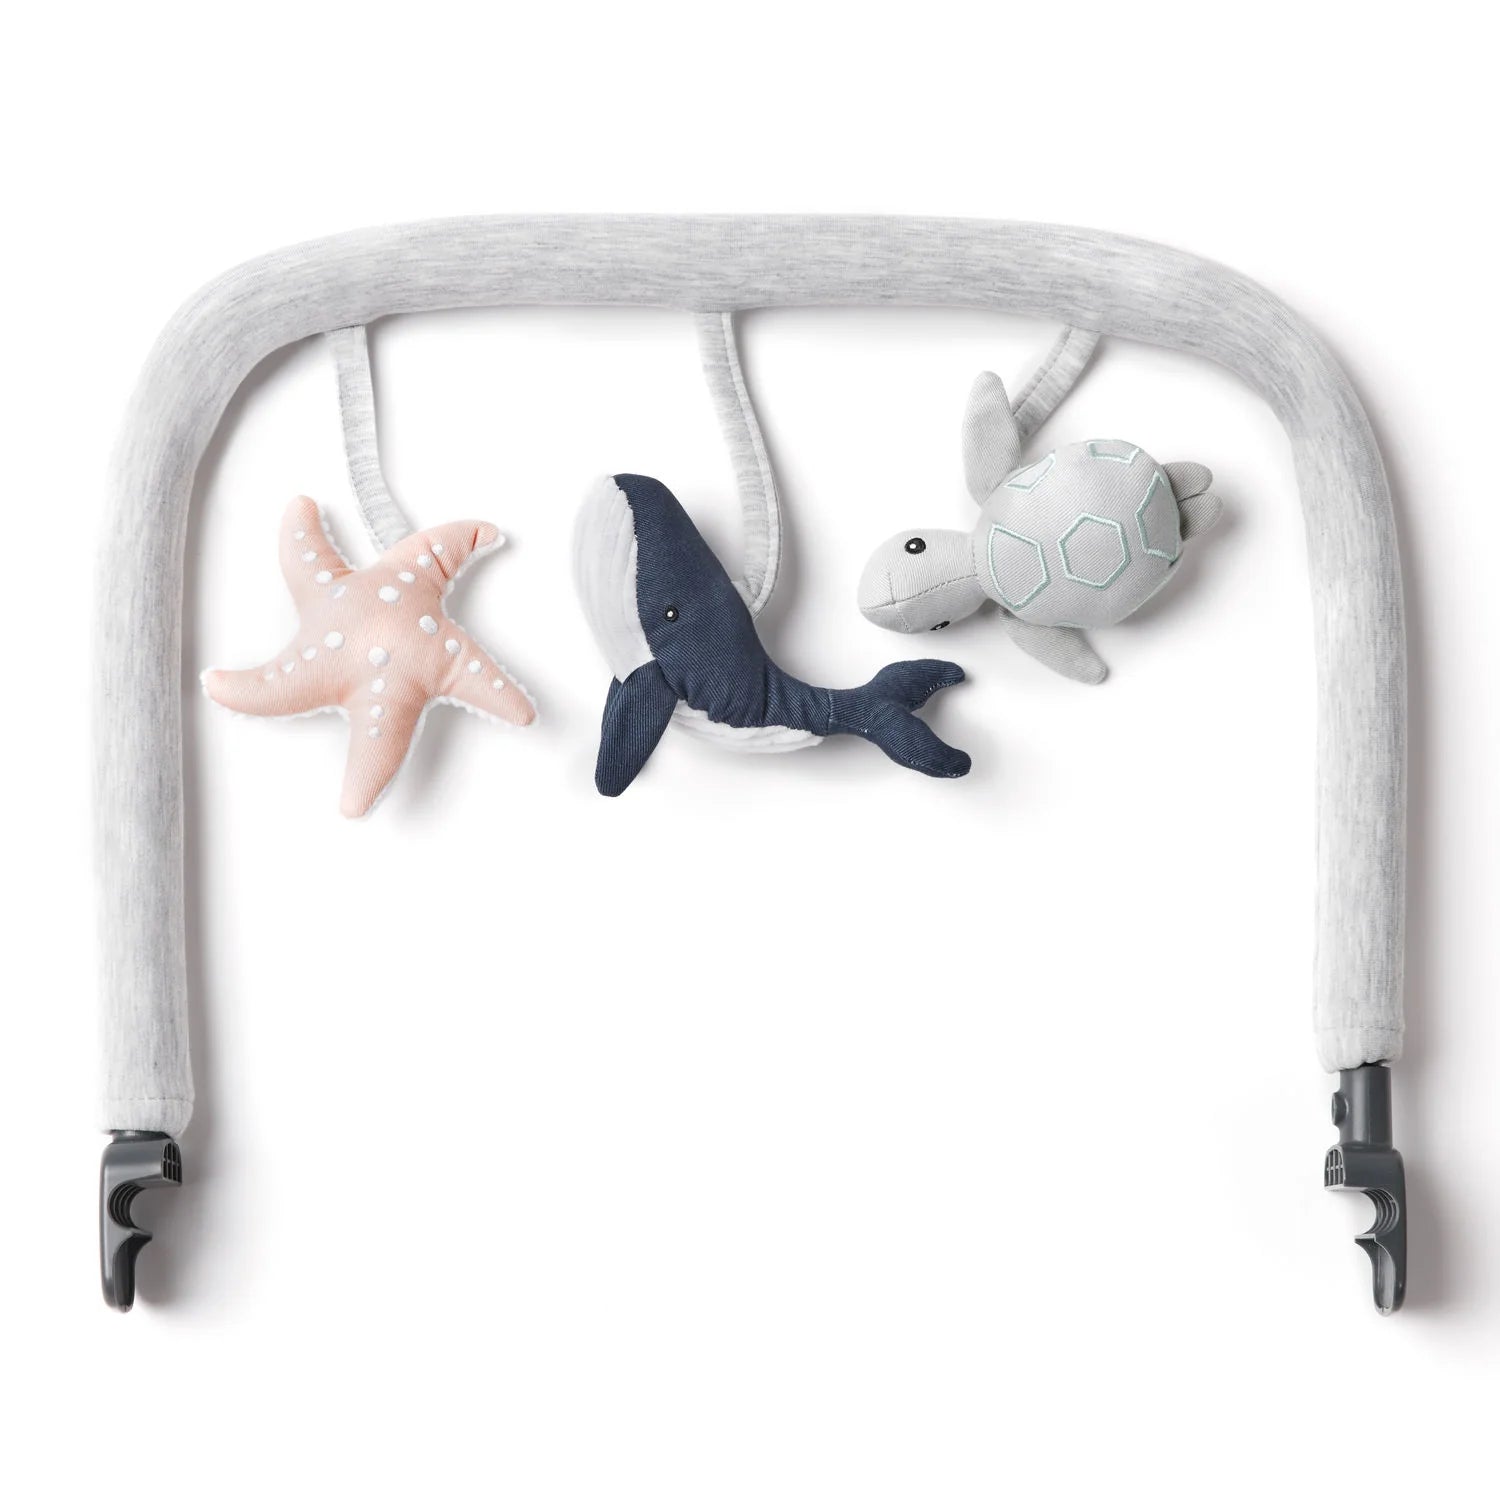 Ergobaby Evolve 3 in 1 Bouncer Toy Bar - Ocean Wonders - Tiny Tots Baby Store 